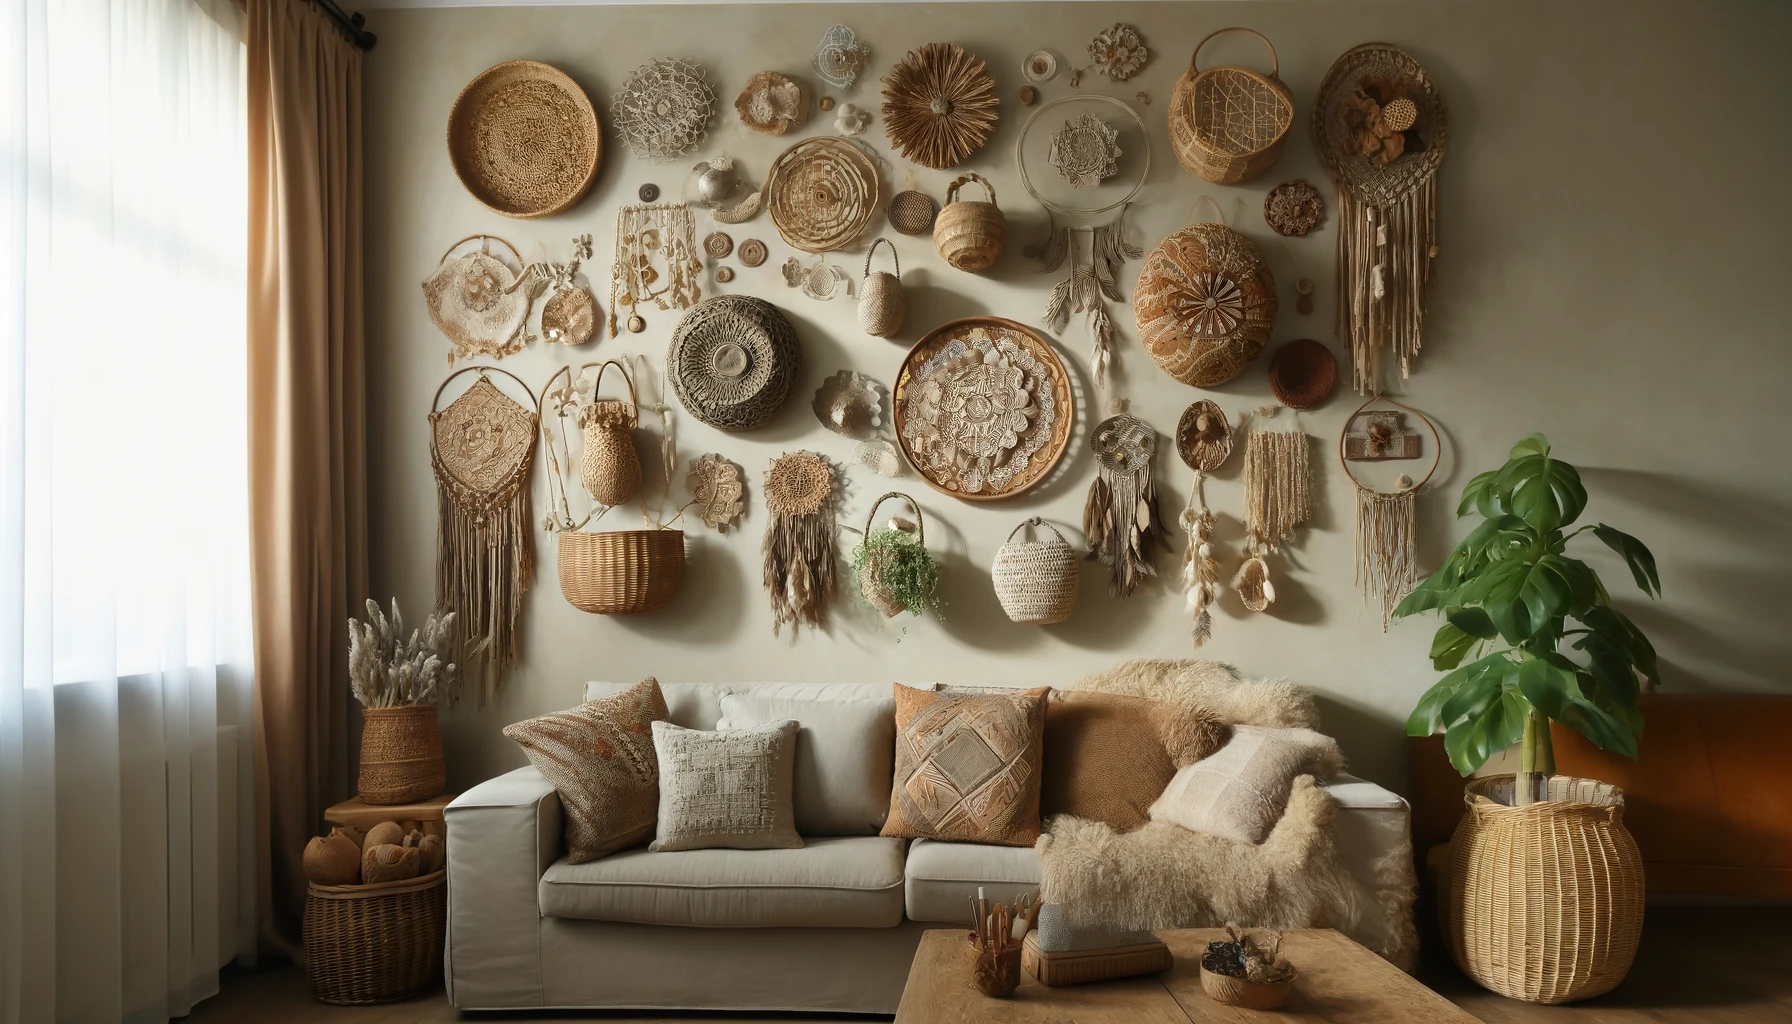 Here's an image of what a bohemian-style living room wall adorned with an assortment of woven baskets might look like. This visual captures the varied sizes, shapes, and textures of the baskets, some decorated with earth-tone paints and others embellished with natural elements like feathers and beads. The cozy setting includes a plush sofa and potted plants, enhancing the rustic and boho vibe of the display.